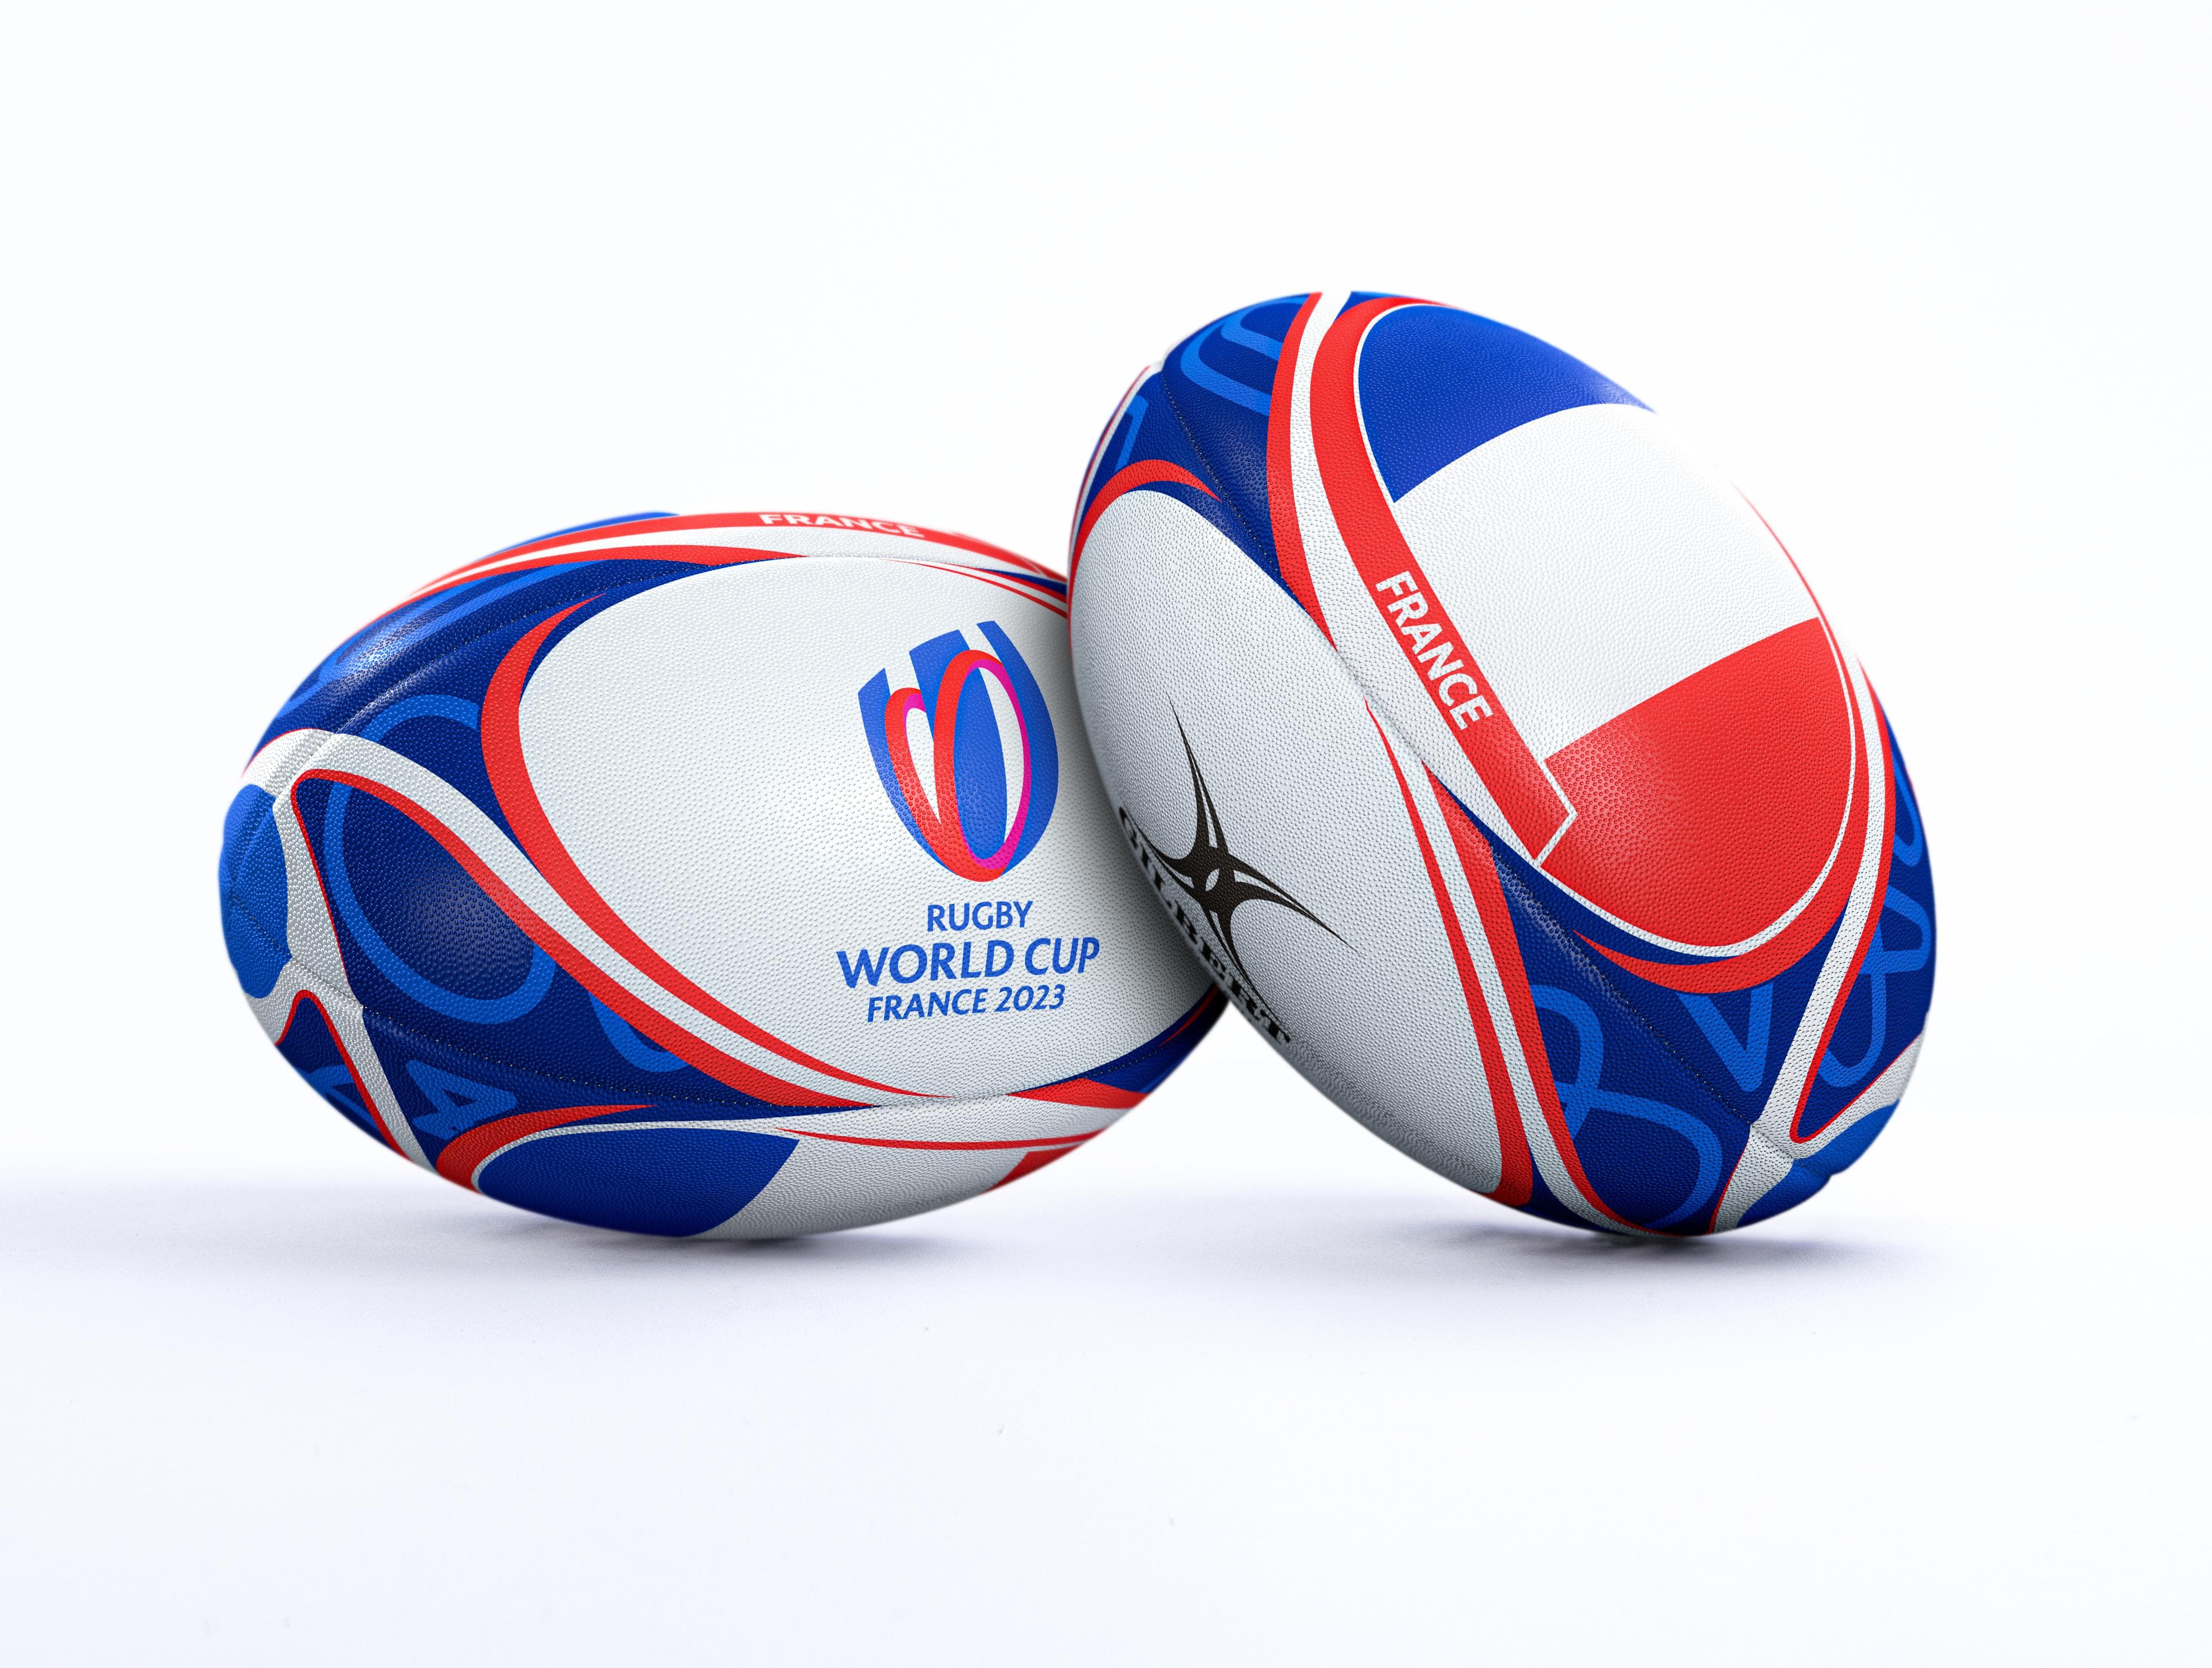 Ballons de Rugby – Official Rugby World Cup 2023 Shop